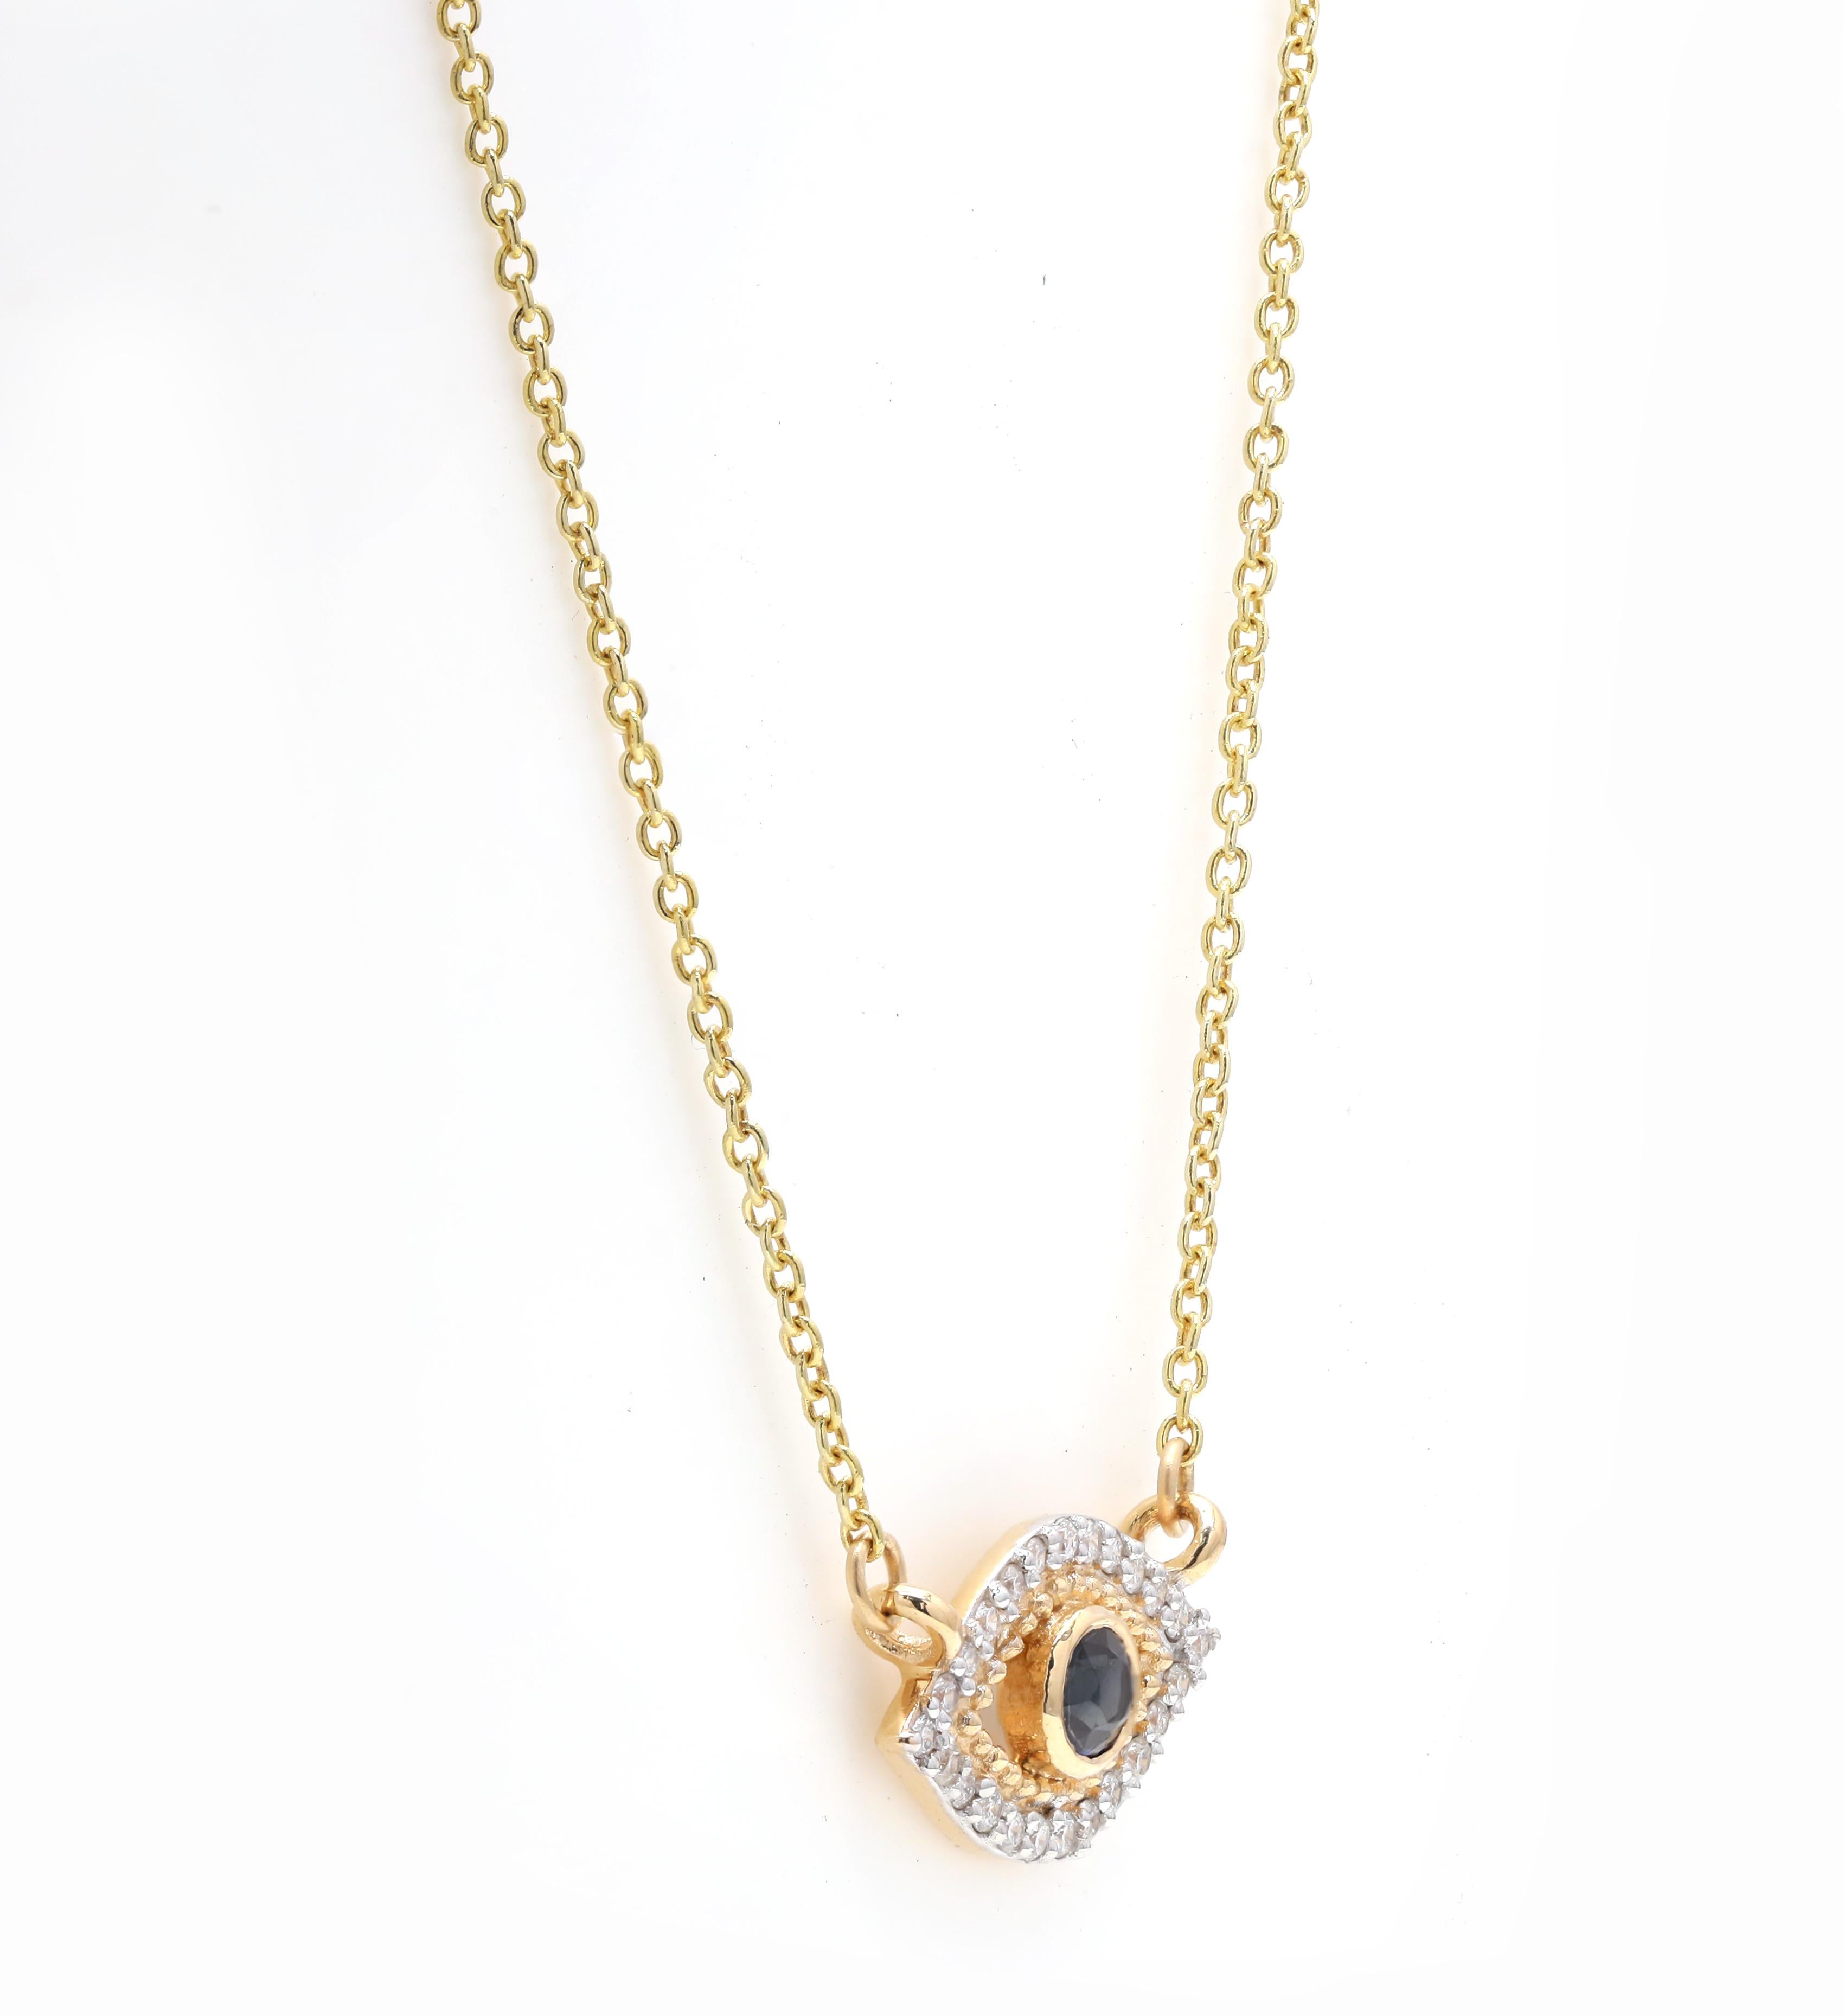 Sapphire Diamond Evil Eye Chain Necklace studded with round cut sapphire in 18k Gold. This stunning piece of jewelry instantly elevates a casual look or dressy outfit. 
Sapphire stimulates concentration and reduces stress.
Designed with round cut